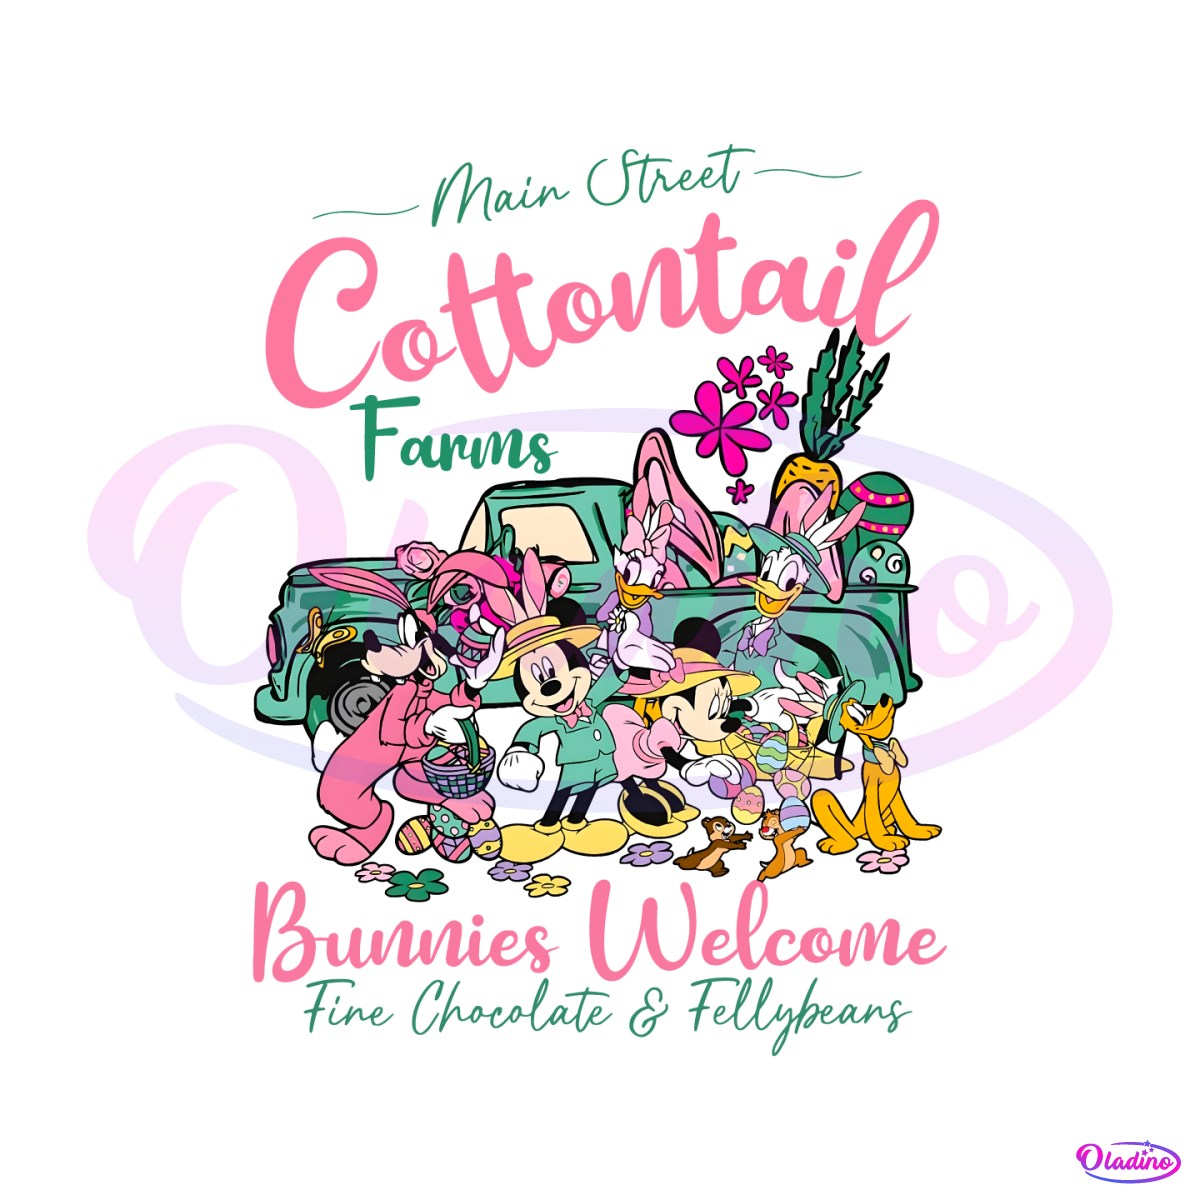 main-street-cottontail-farm-bunnies-welcome-png